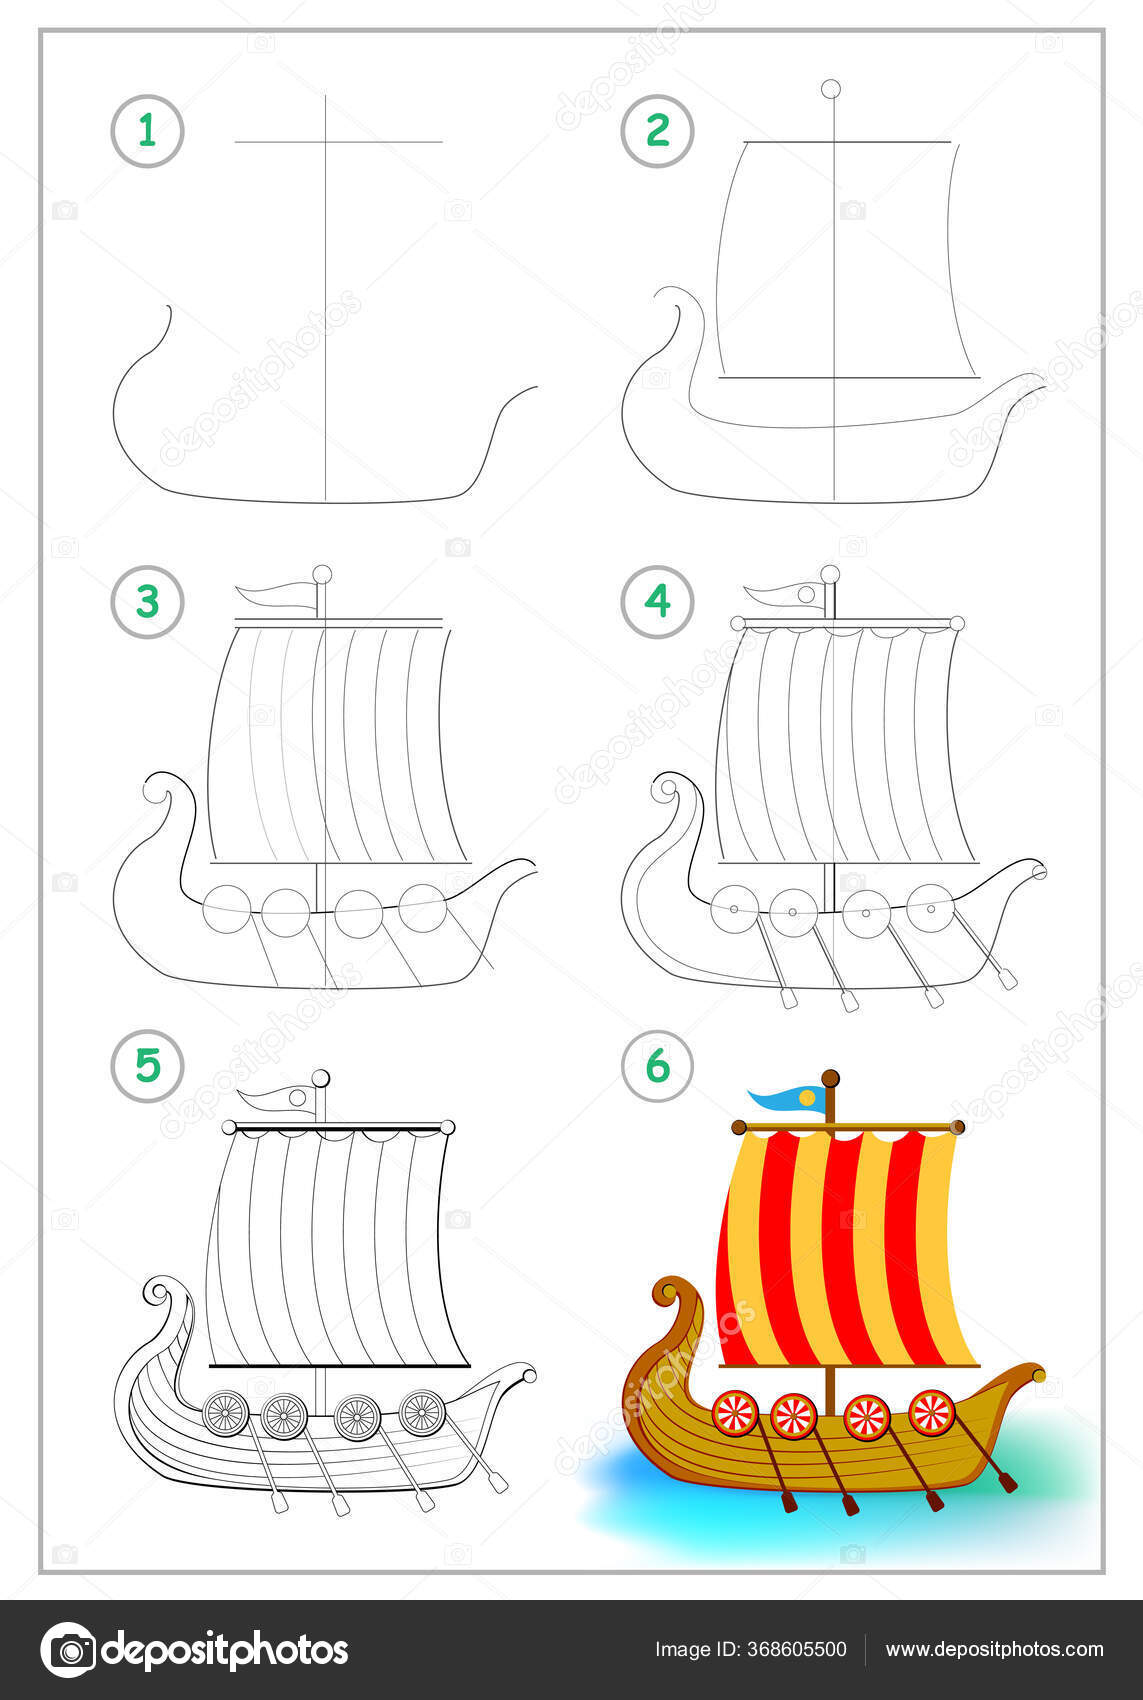 How To Draw Ship? Ship Drawing Guide: Learning To Draw Ships and Boats For  Kids | Step by Step Guide | Activity Book For Children | For Boat and Ships  Lovers by - Amazon.ae